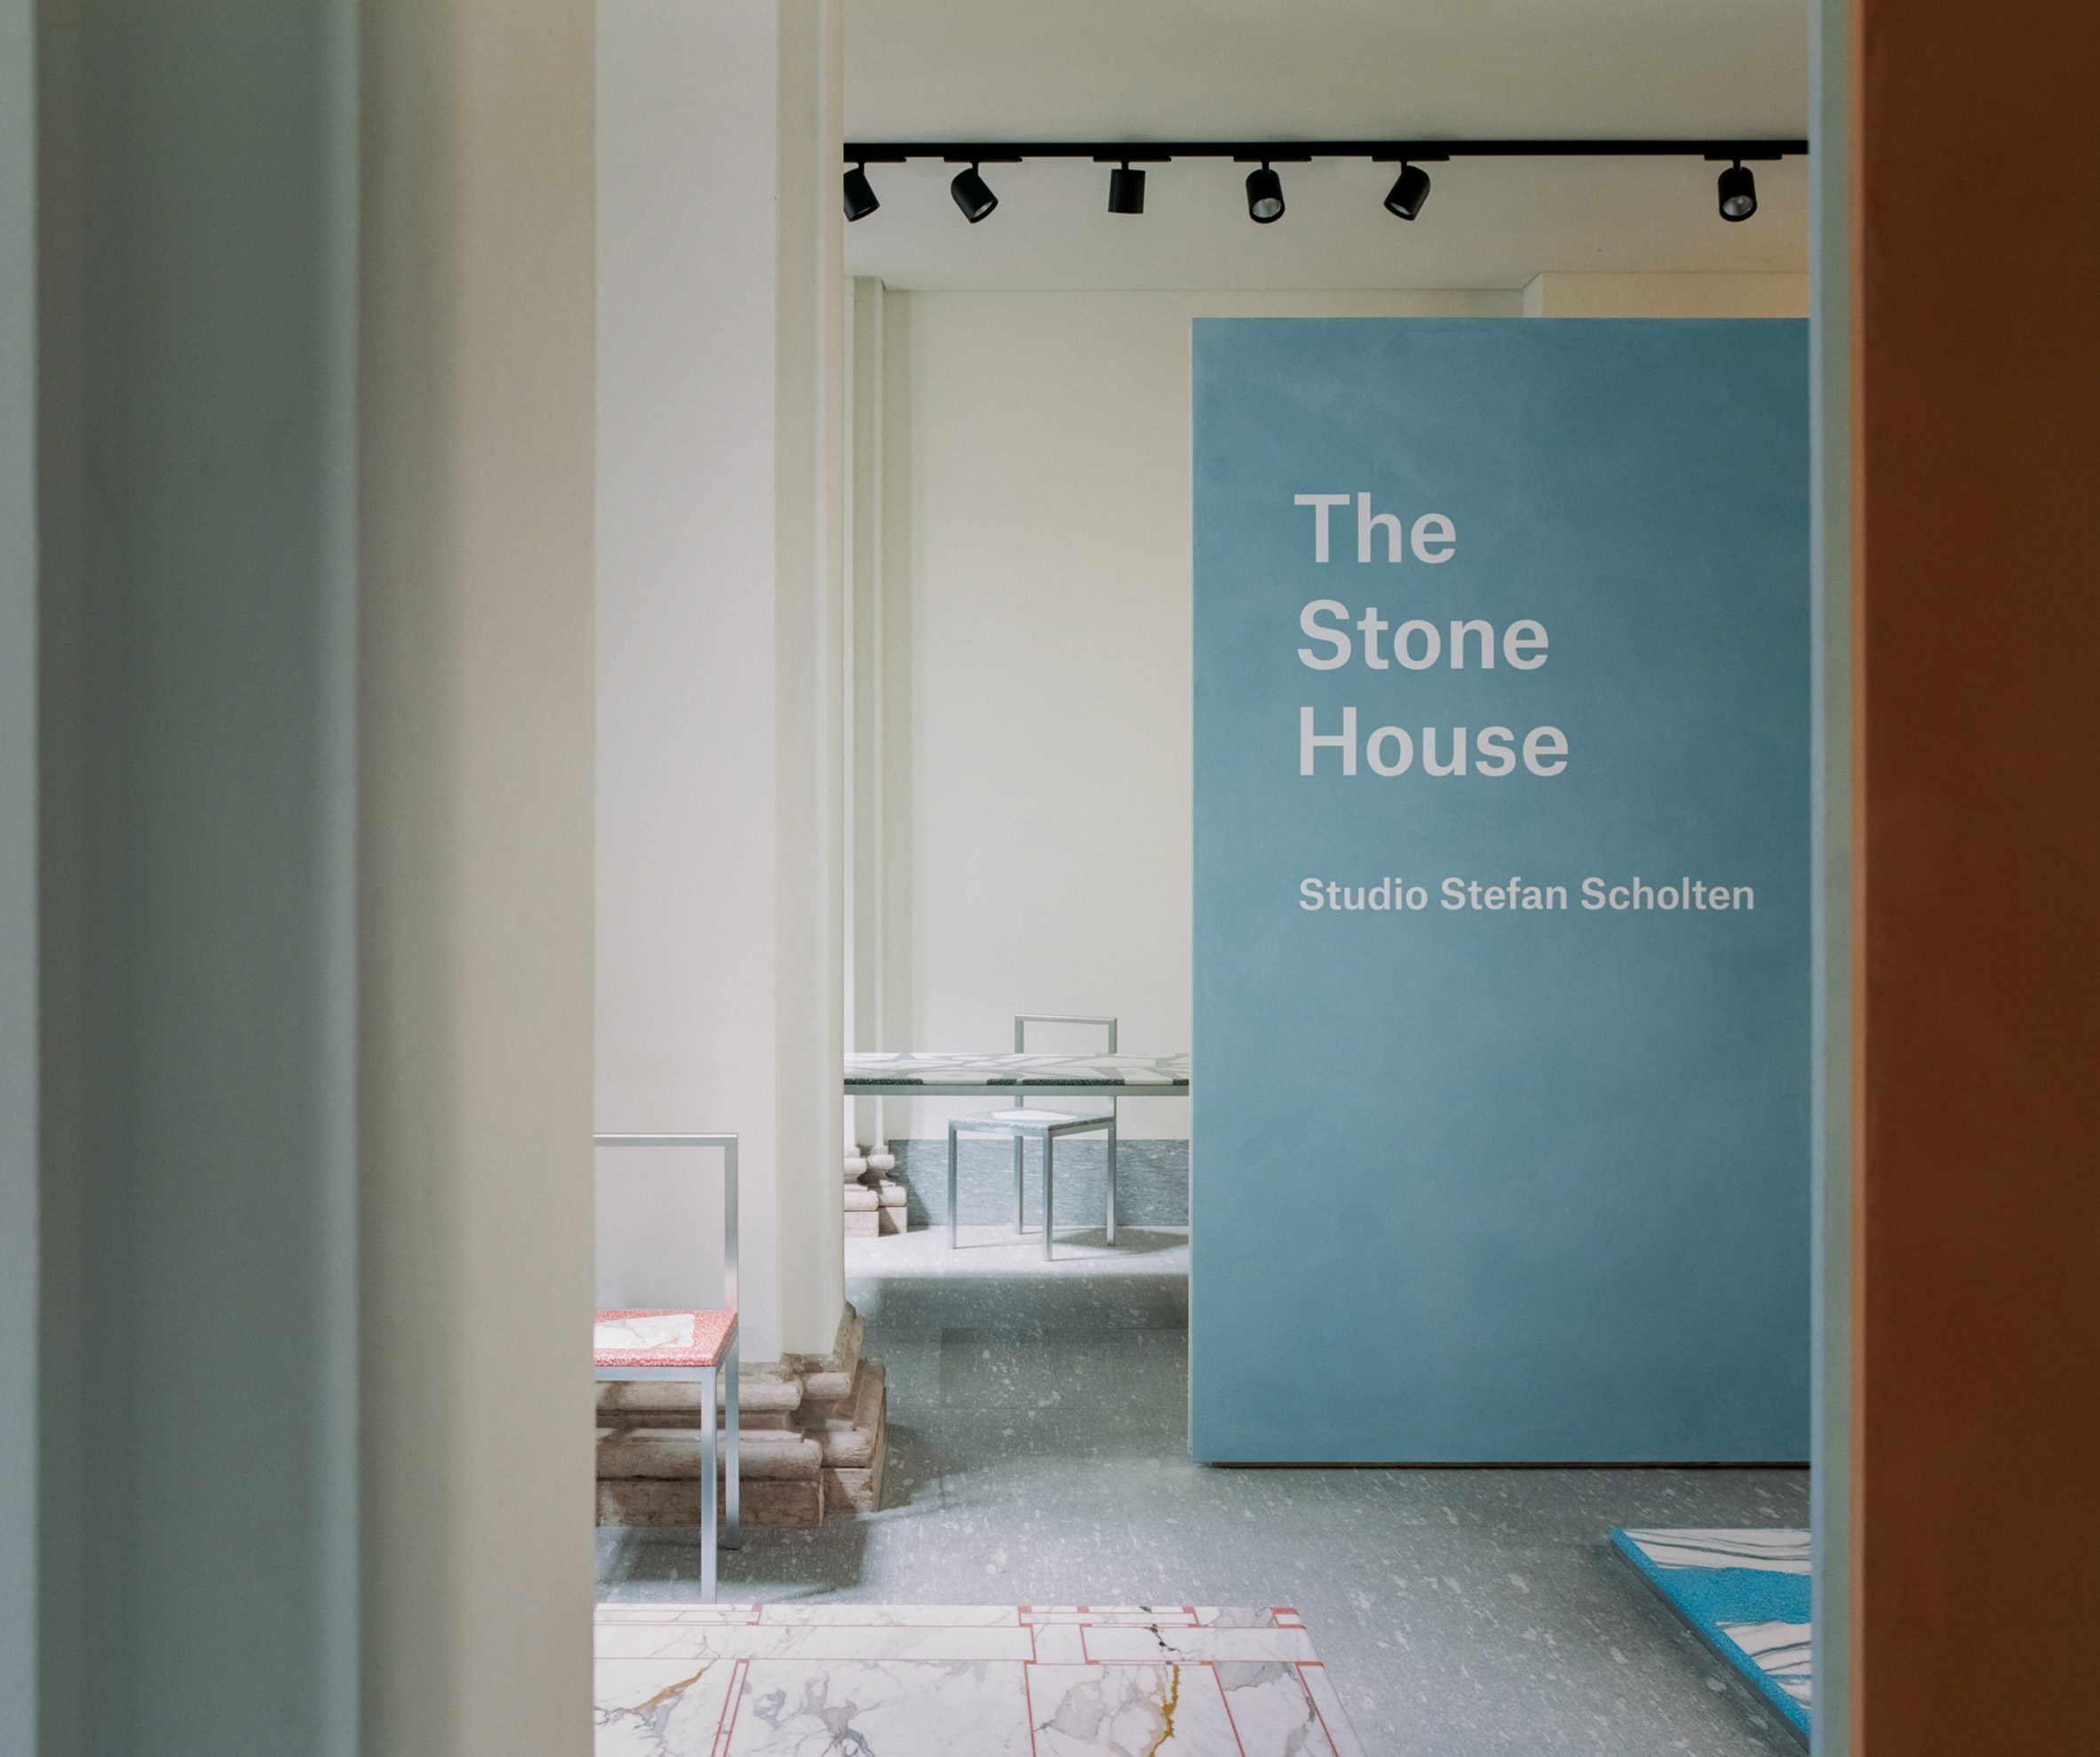 Entry to the Stone House exhibition